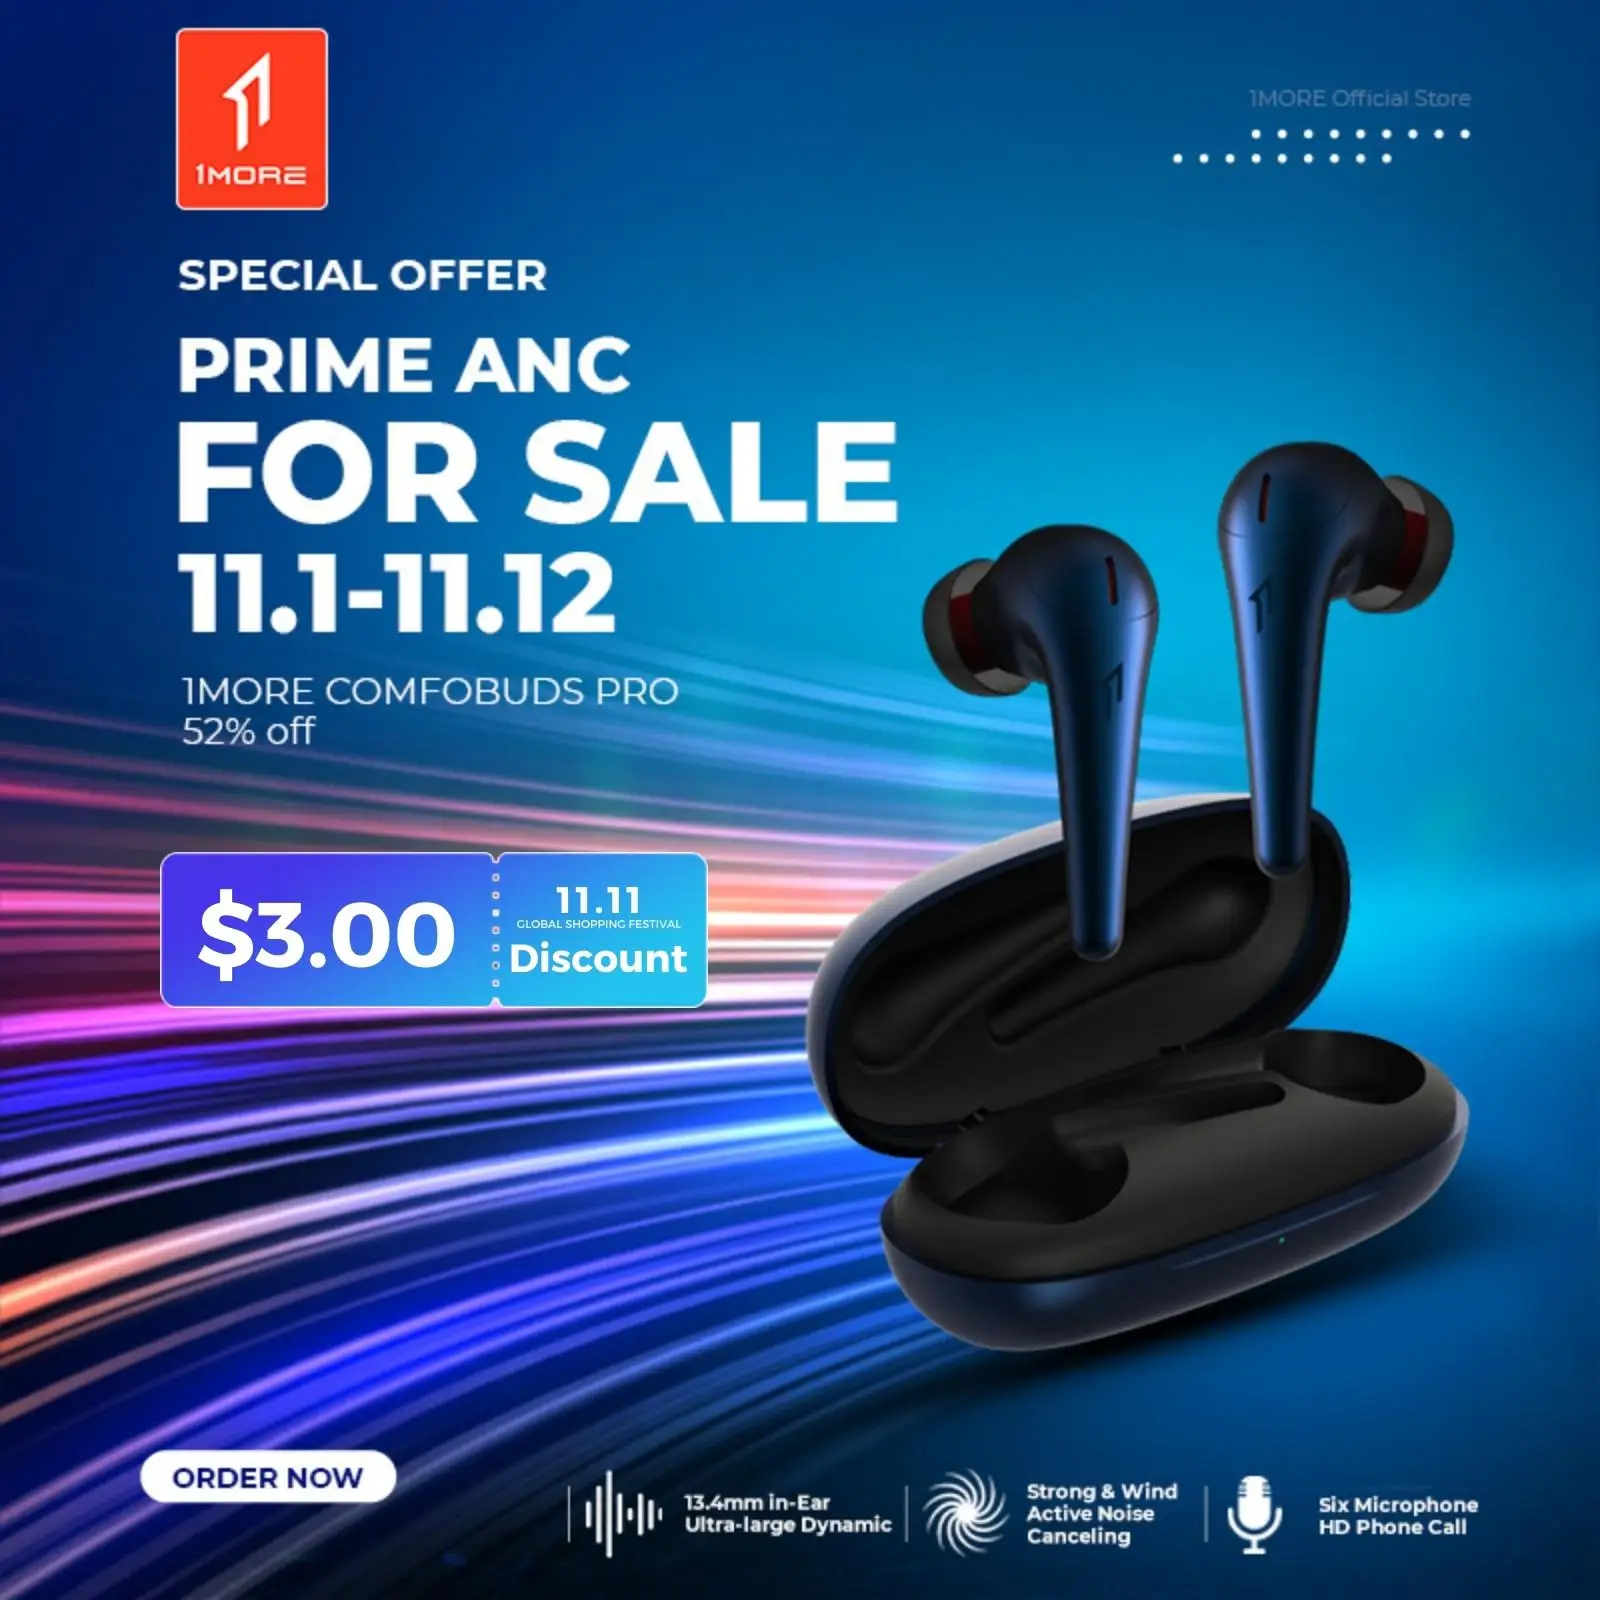 

1MORE Comfobuds Pro ANC Noise Cancelling Bluetooth 5.0 TWS Wireless Headphones 13.4mm Bass Dynamic AAC EQ Tuning Earphones